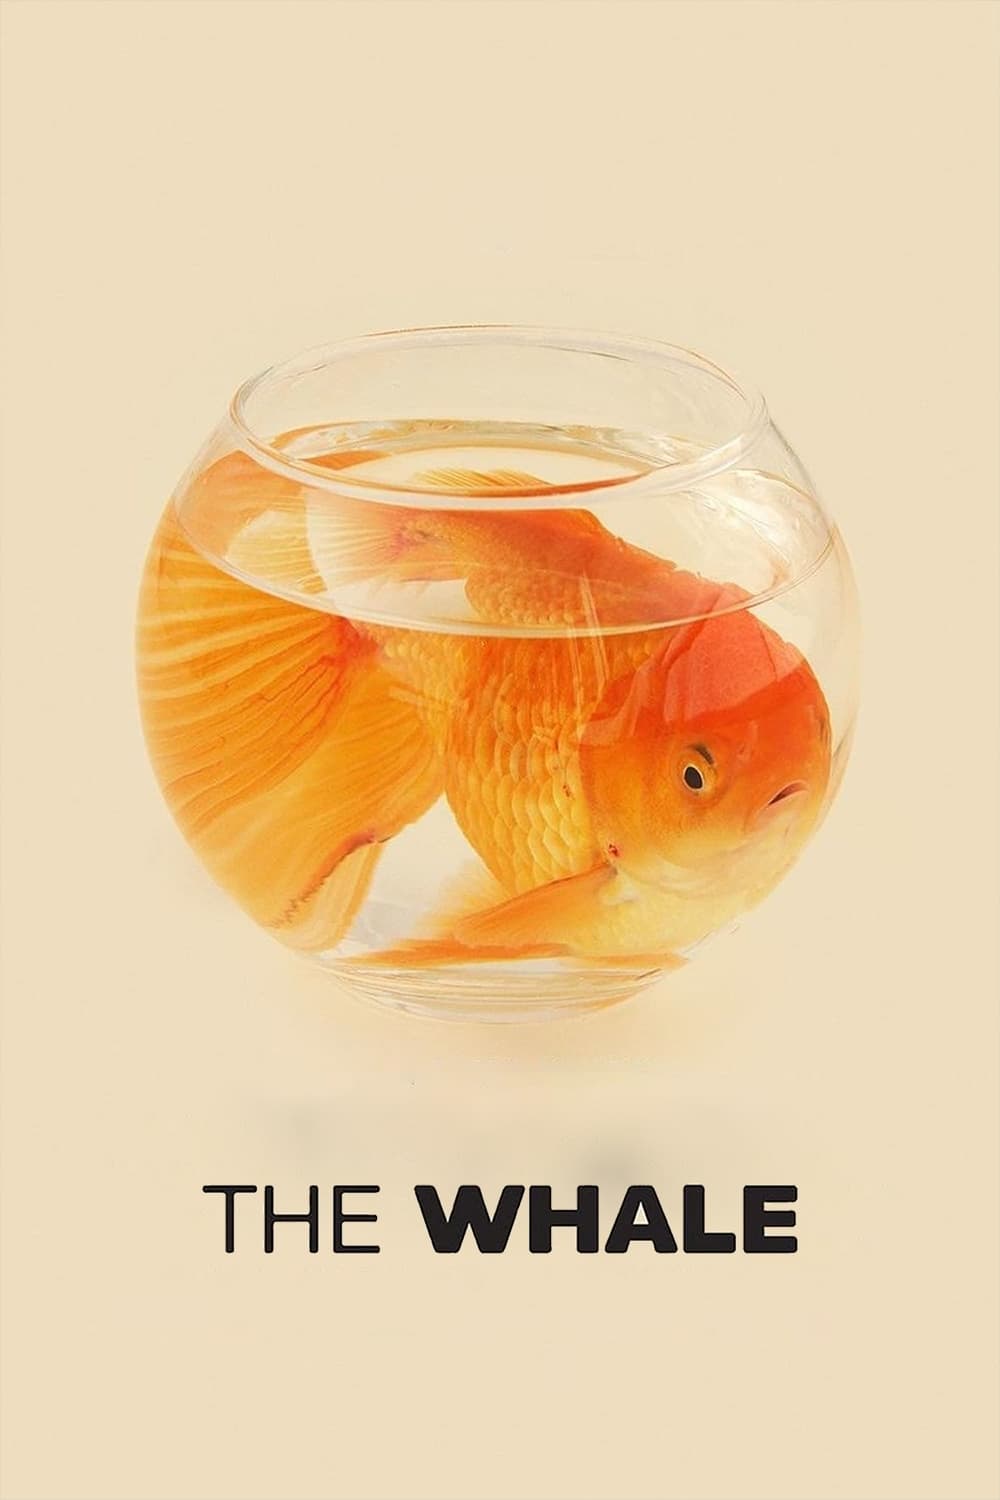 Poster for the movie "The Whale"